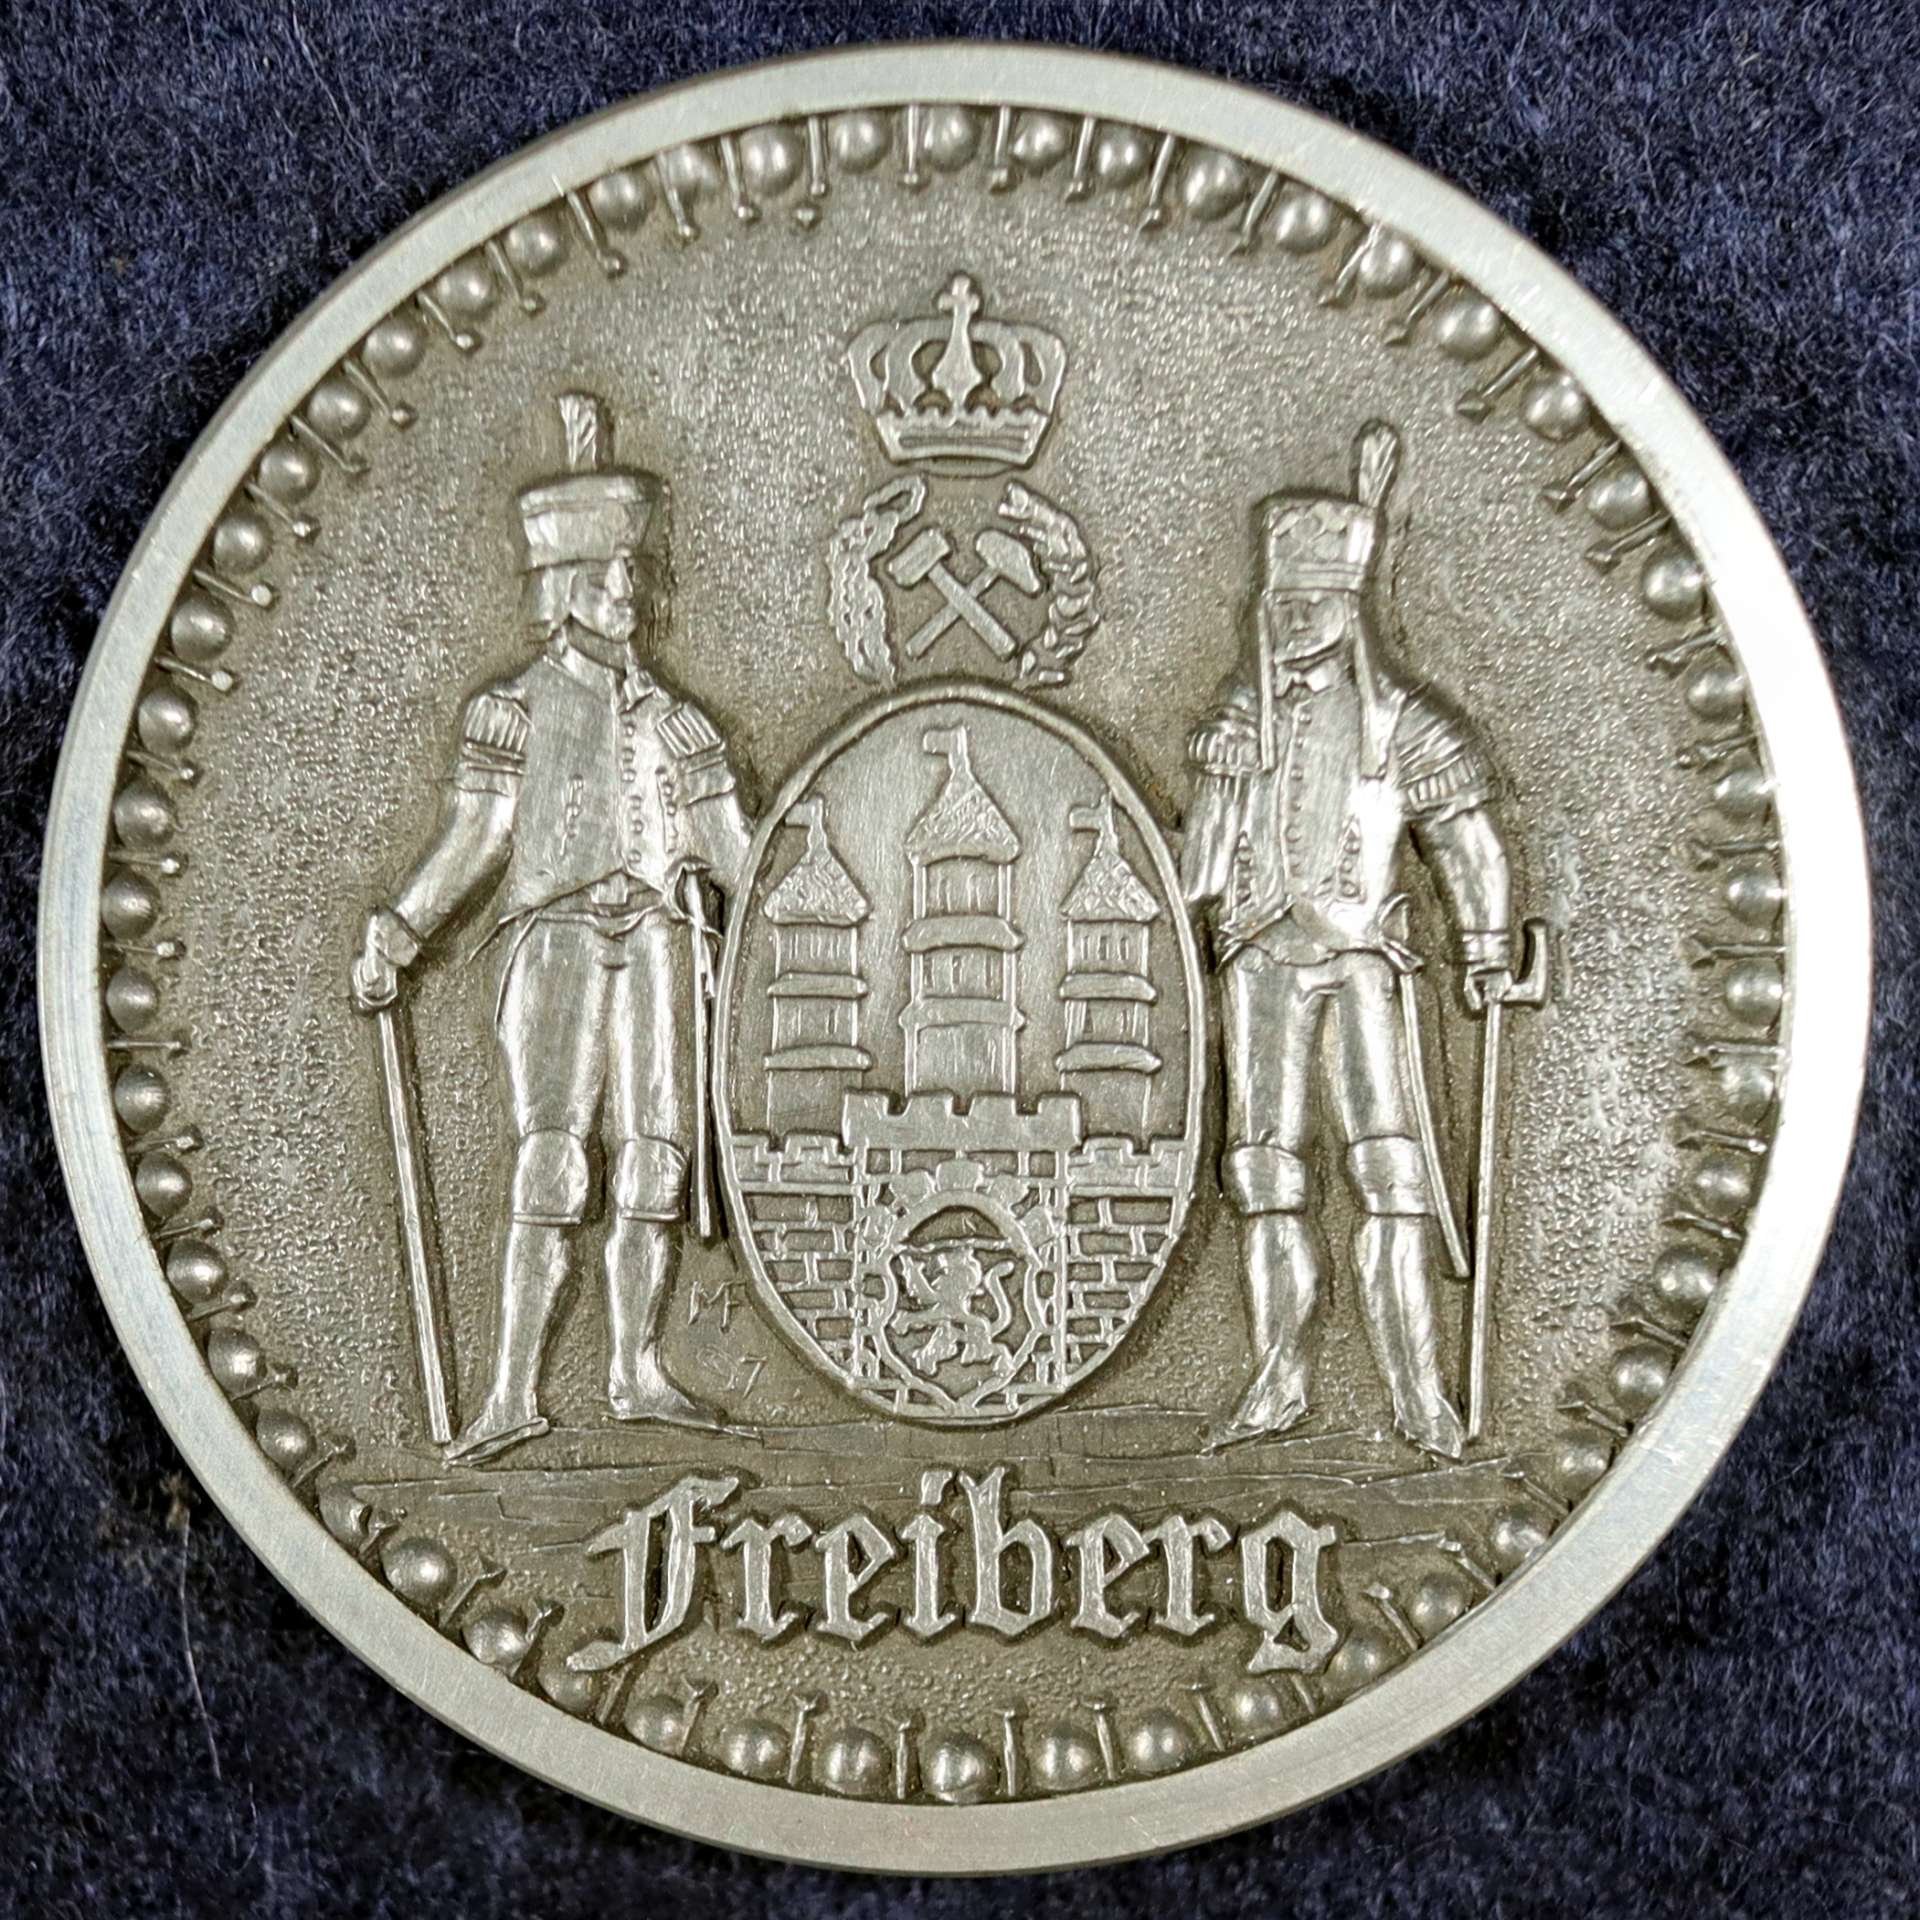 Medaille "Bergstadtfest Freiberg 1998" (Saxonia-Freiberg-Stiftung CC BY-NC-SA)